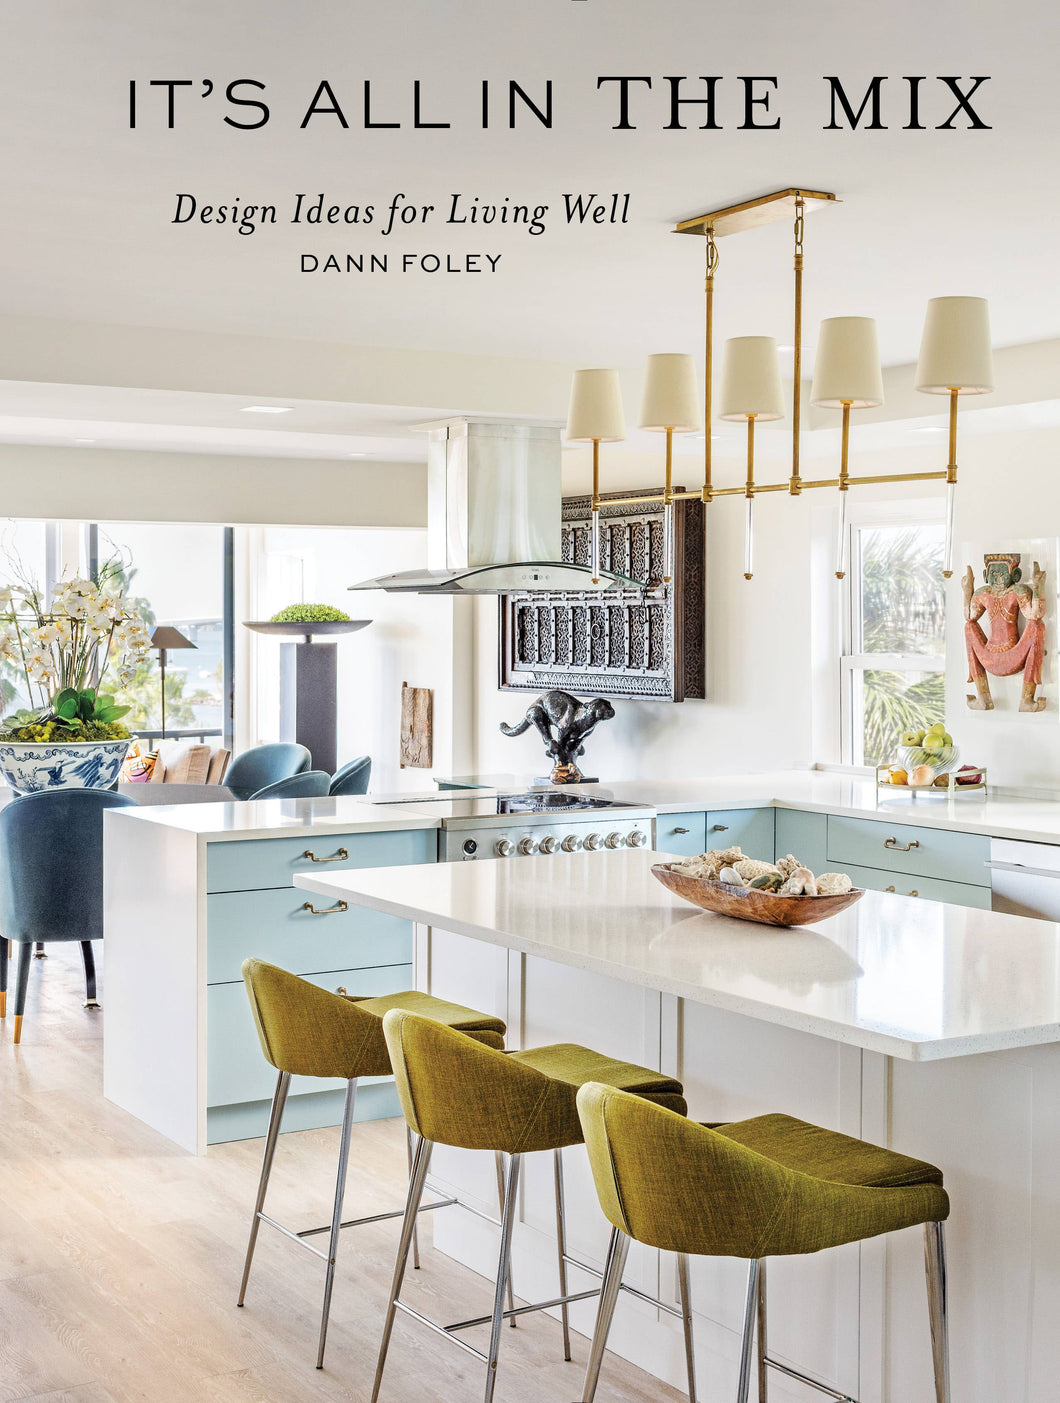 It's All in the Mix: Design Ideas for Living Well-Schiffer Publishing